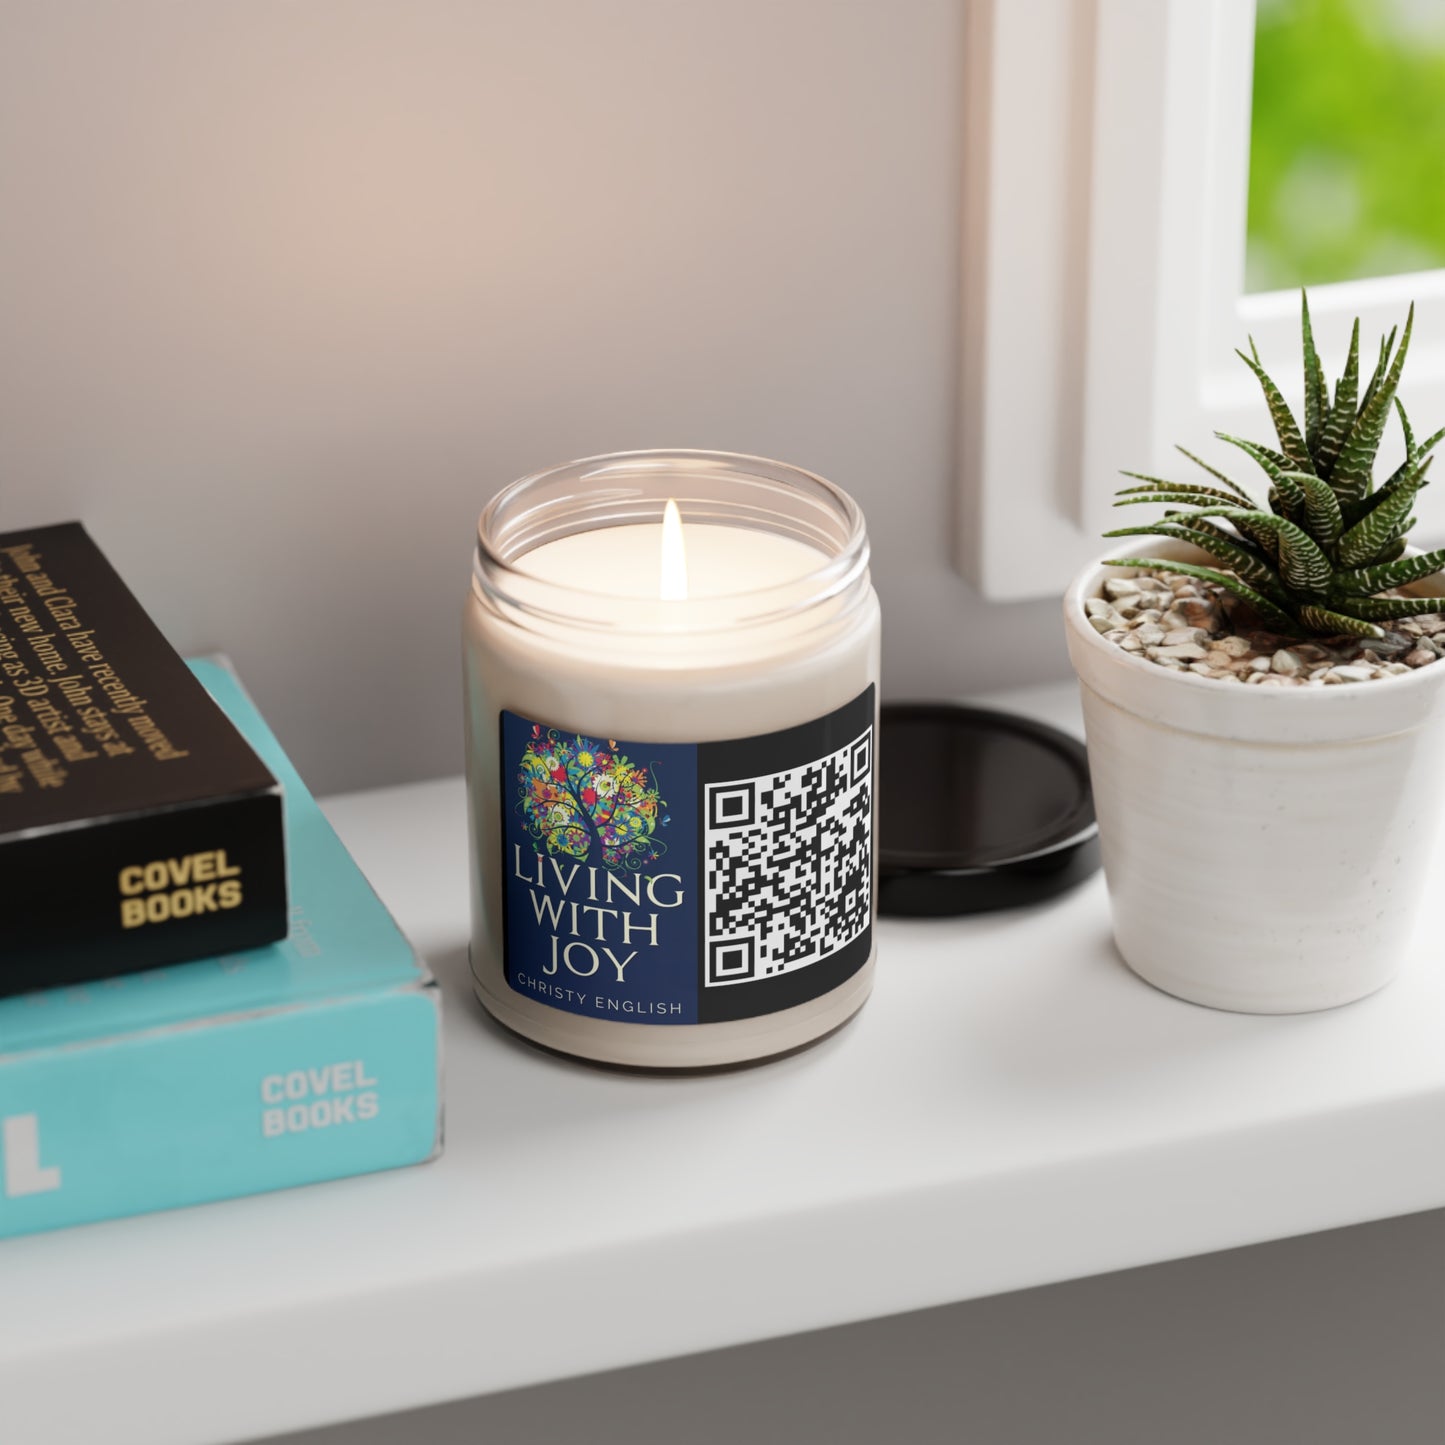 Living With Joy - Scented Soy Candle